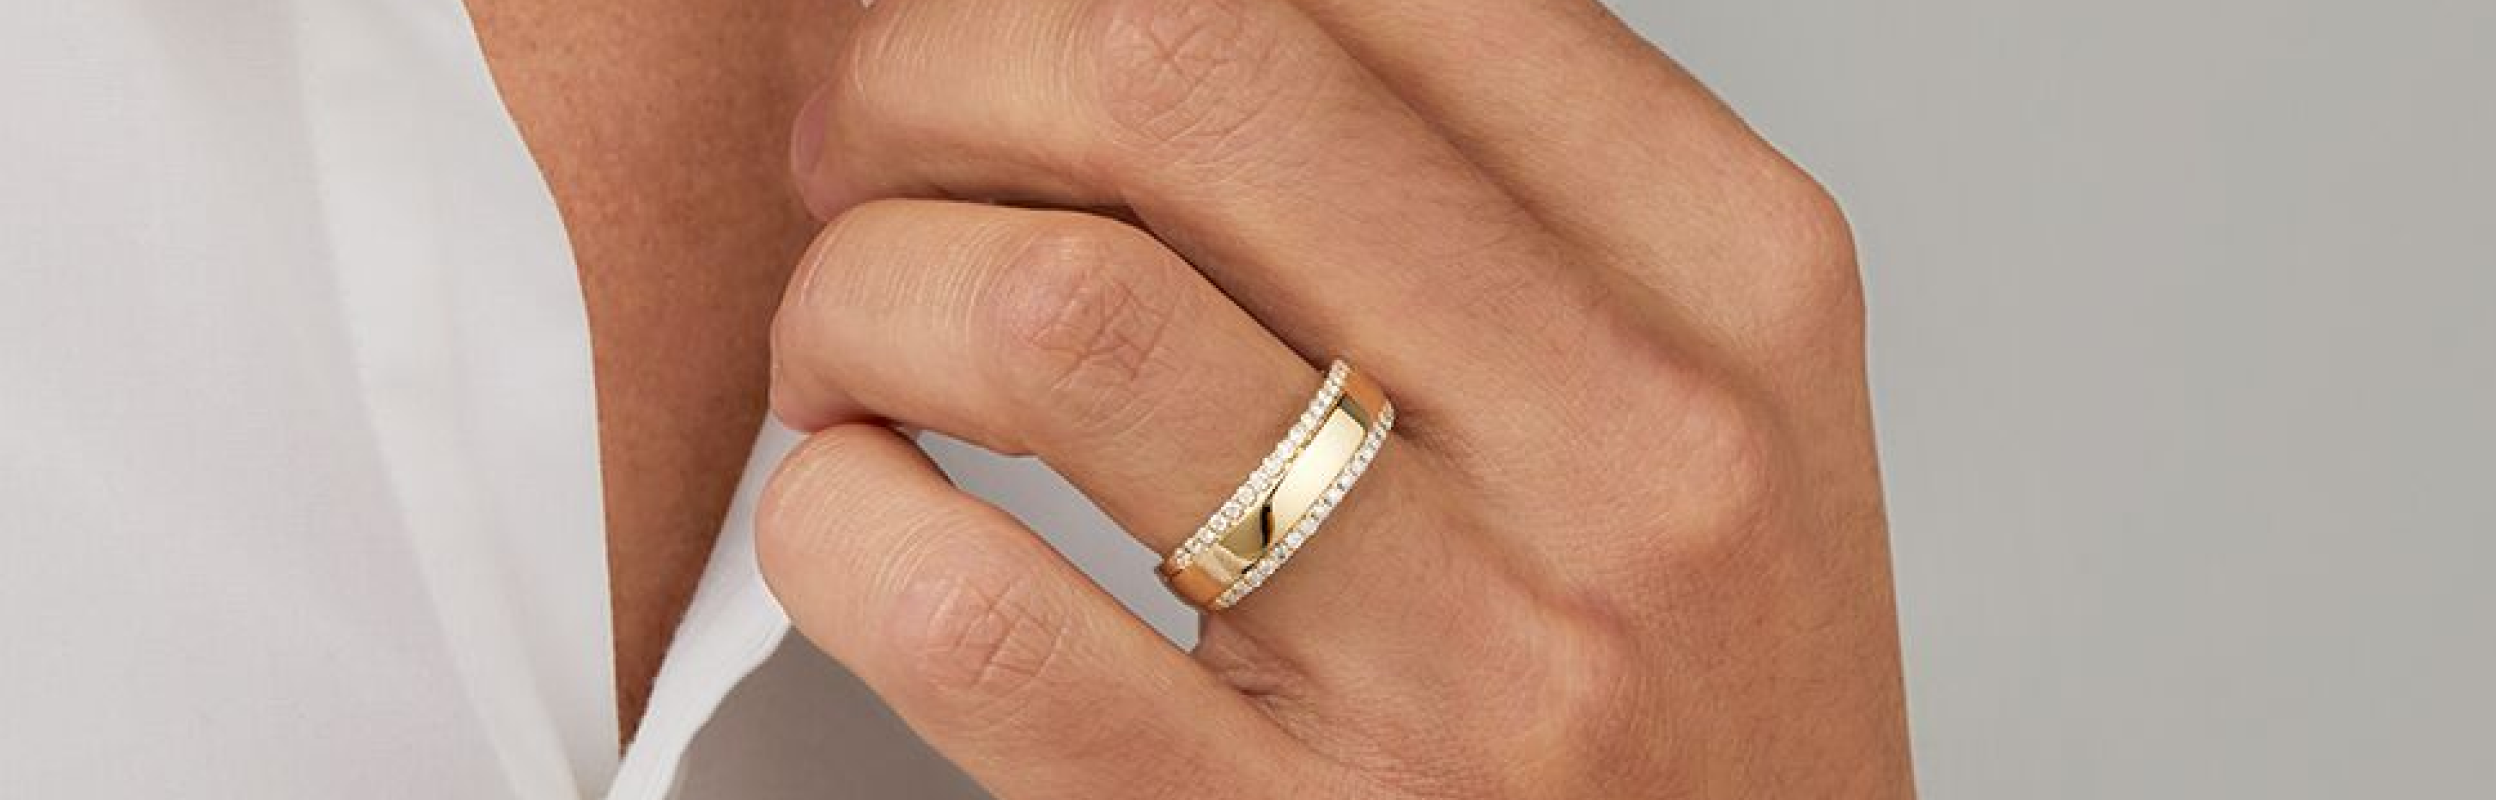 Men's Yellow Gold Wedding Bands and Rings at Michael Hill NZ